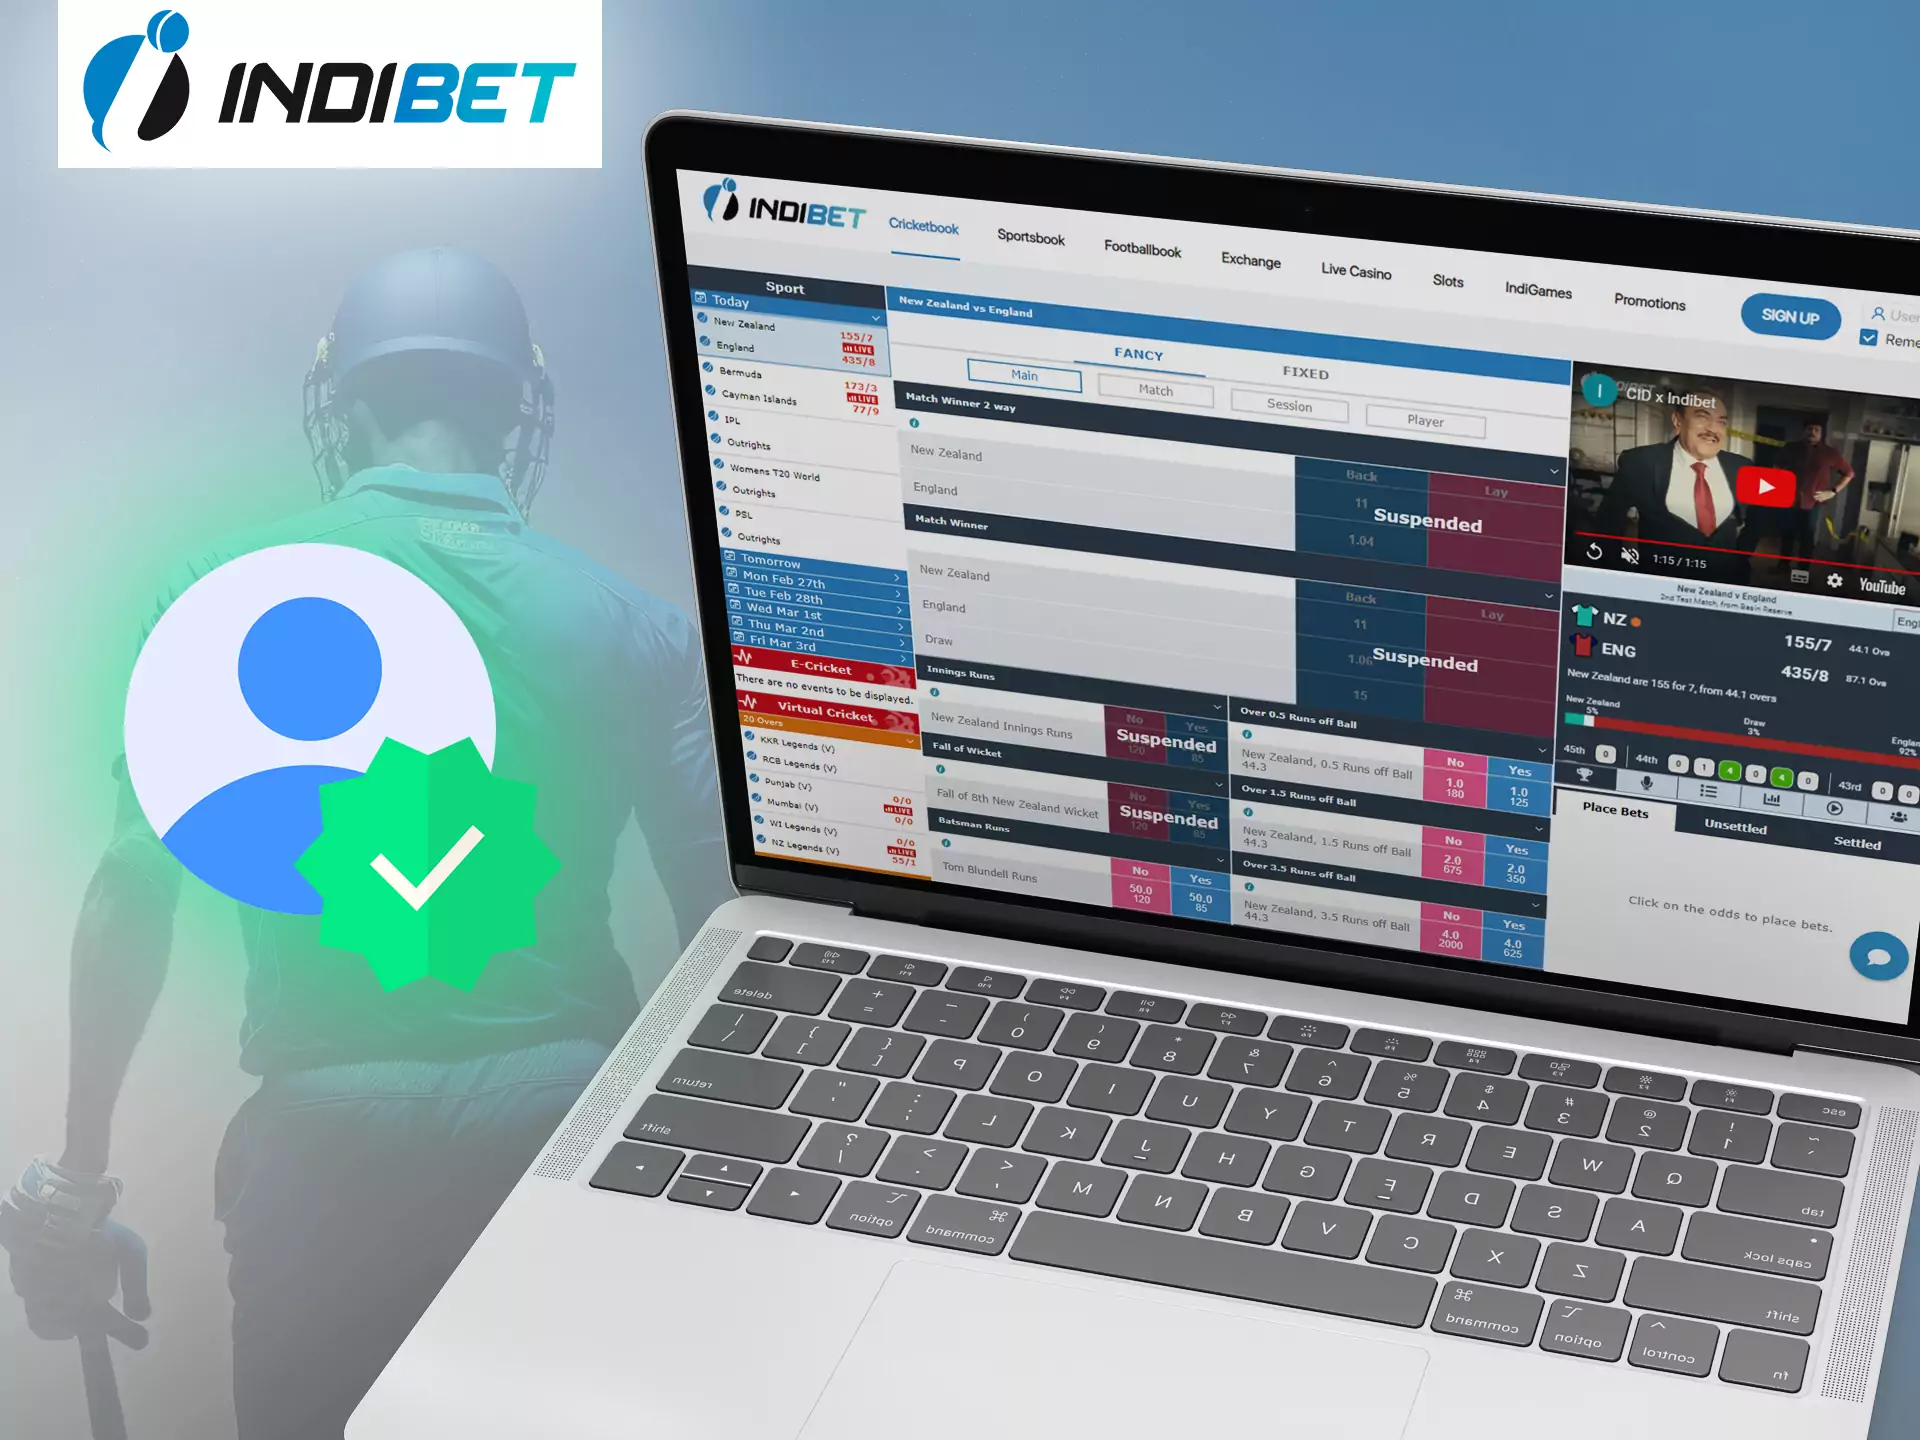 Confirm your identity on Indibet to bet and withdraw your winnings.